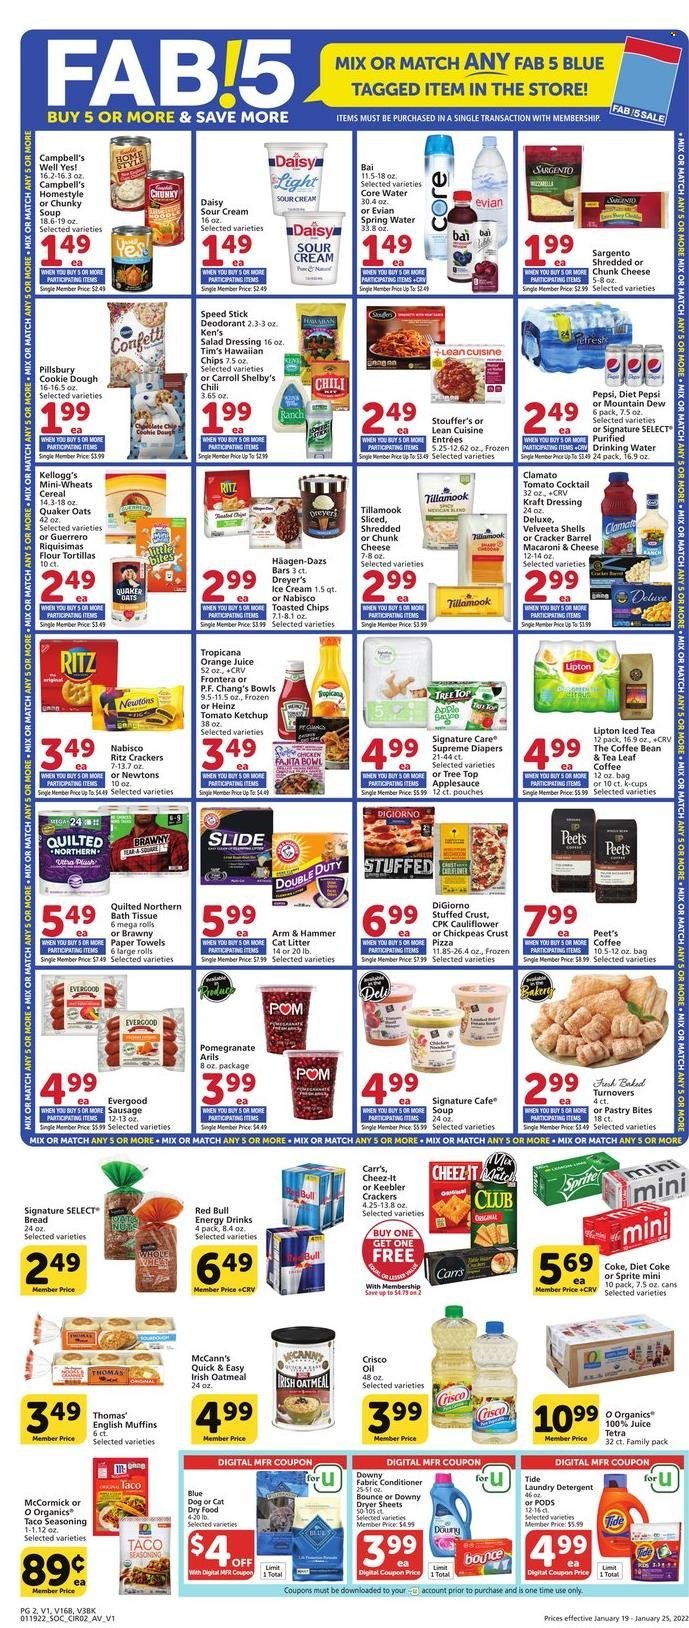 thumbnail - Albertsons Flyer - 01/19/2022 - 01/25/2022 - Sales products - bread, english muffins, tortillas, turnovers, flour tortillas, Campbell's, macaroni & cheese, pizza, soup, fajita, Quaker, Lean Cuisine, Kraft®, sausage, chunk cheese, Sargento, sour cream, ice cream, Häagen-Dazs, Stouffer's, cookie dough, crackers, Kellogg's, Keebler, RITZ, Cheez-It, ARM & HAMMER, Crisco, oatmeal, oats, Heinz, cereals, rice, chickpeas, spice, salad dressing, ketchup, dressing, oil, apple sauce, Coca-Cola, Mountain Dew, Sprite, Pepsi, orange juice, juice, energy drink, Lipton, ice tea, Diet Pepsi, Diet Coke, Clamato, Red Bull, Bai, spring water, Evian, coffee, coffee capsules, K-Cups, nappies, bath tissue, Quilted Northern, kitchen towels, paper towels, detergent, Tide, Fab, laundry detergent, dryer sheets, Downy Laundry, anti-perspirant, Speed Stick, deodorant, mop, bowl, cat litter, pomegranate. Page 2.